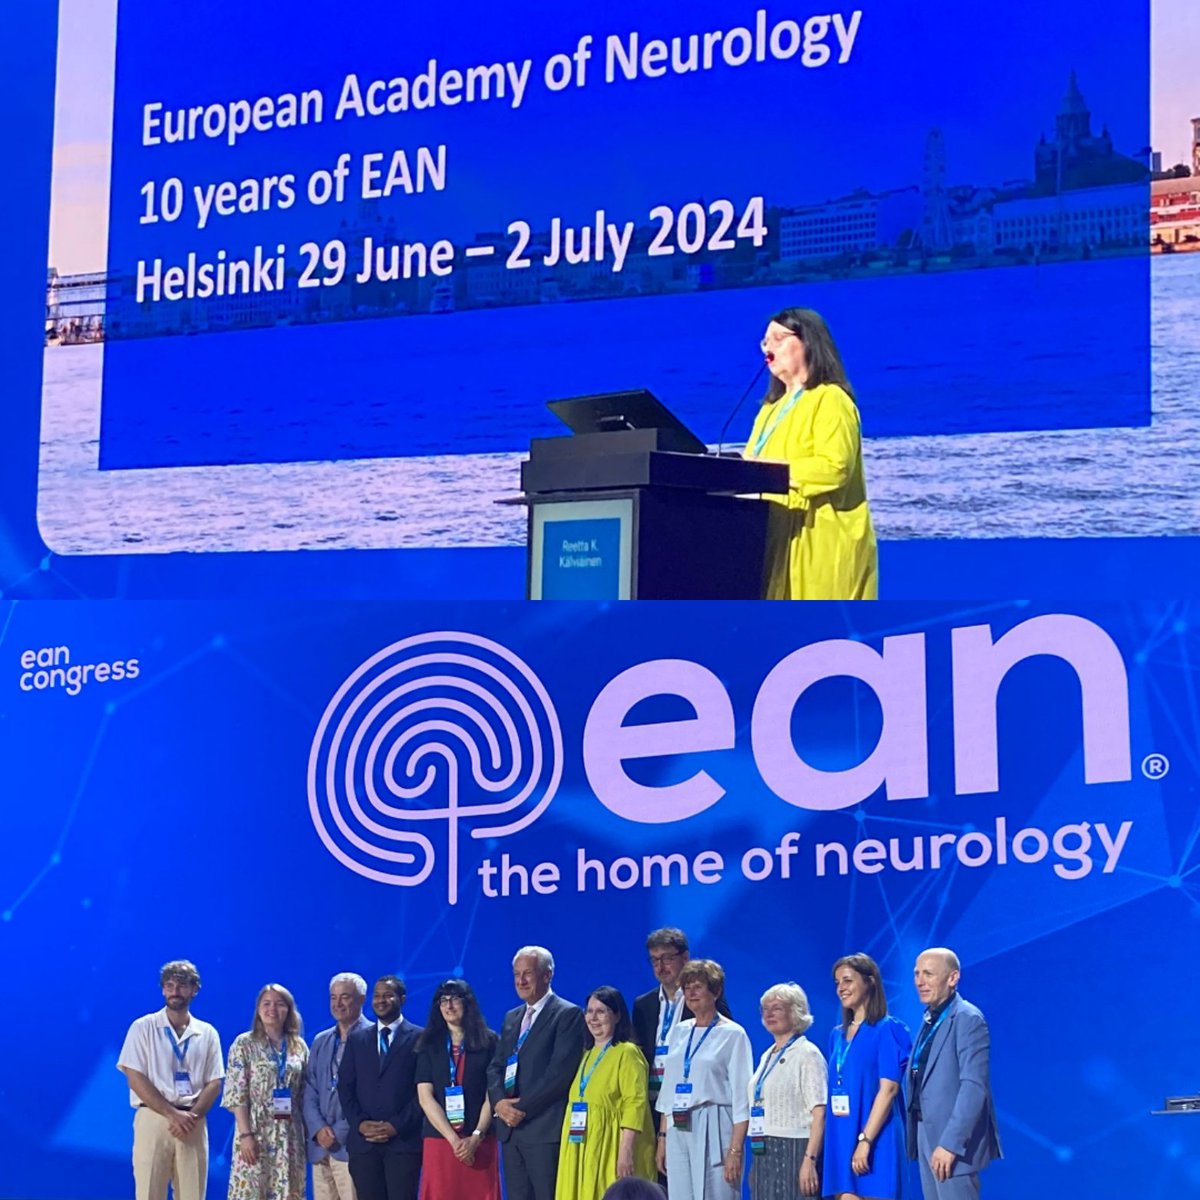 Farewell Budapest #EAN2023 and warmest welcome to Helsinki to the 10th @EANeurology Congress 29.6.-2.7.2024  #ean2024 #homeofneurology #brainhealthmission #codedtoconnect @messukeskus https://t.co/m5eYHVMFkO